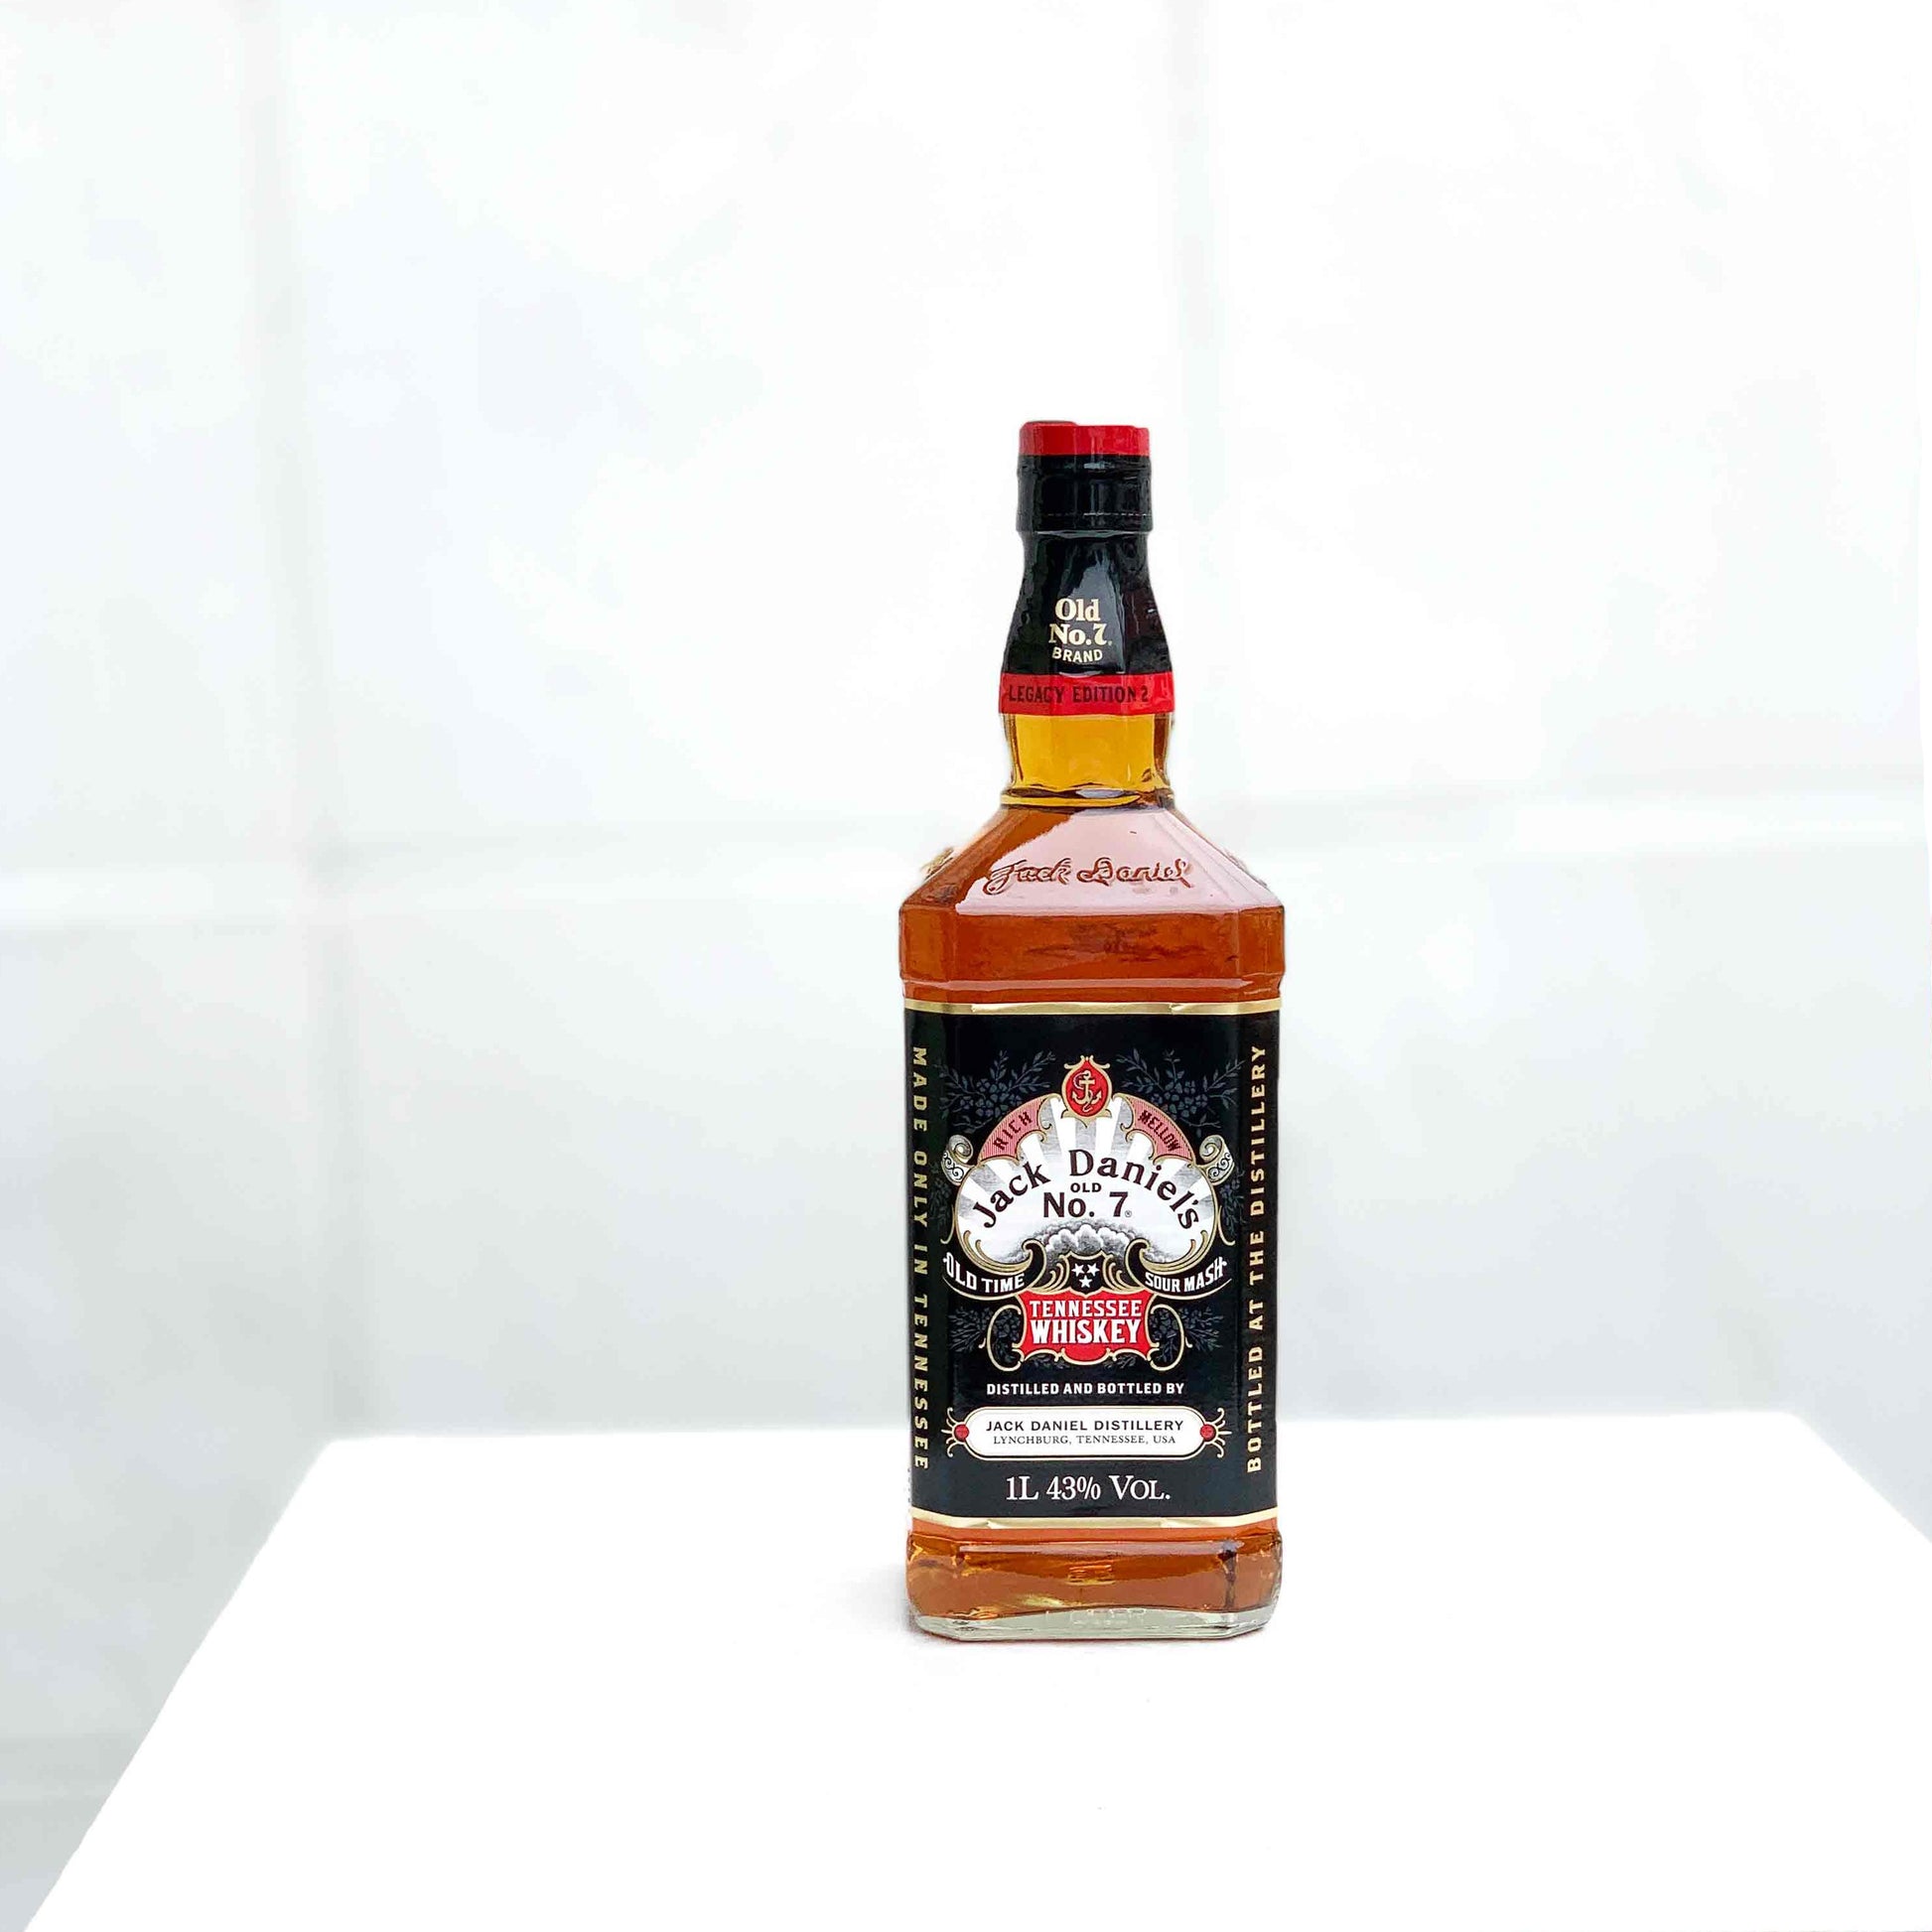 Jack Daniel's Old No. 7 Legacy Edition 1 Whisky